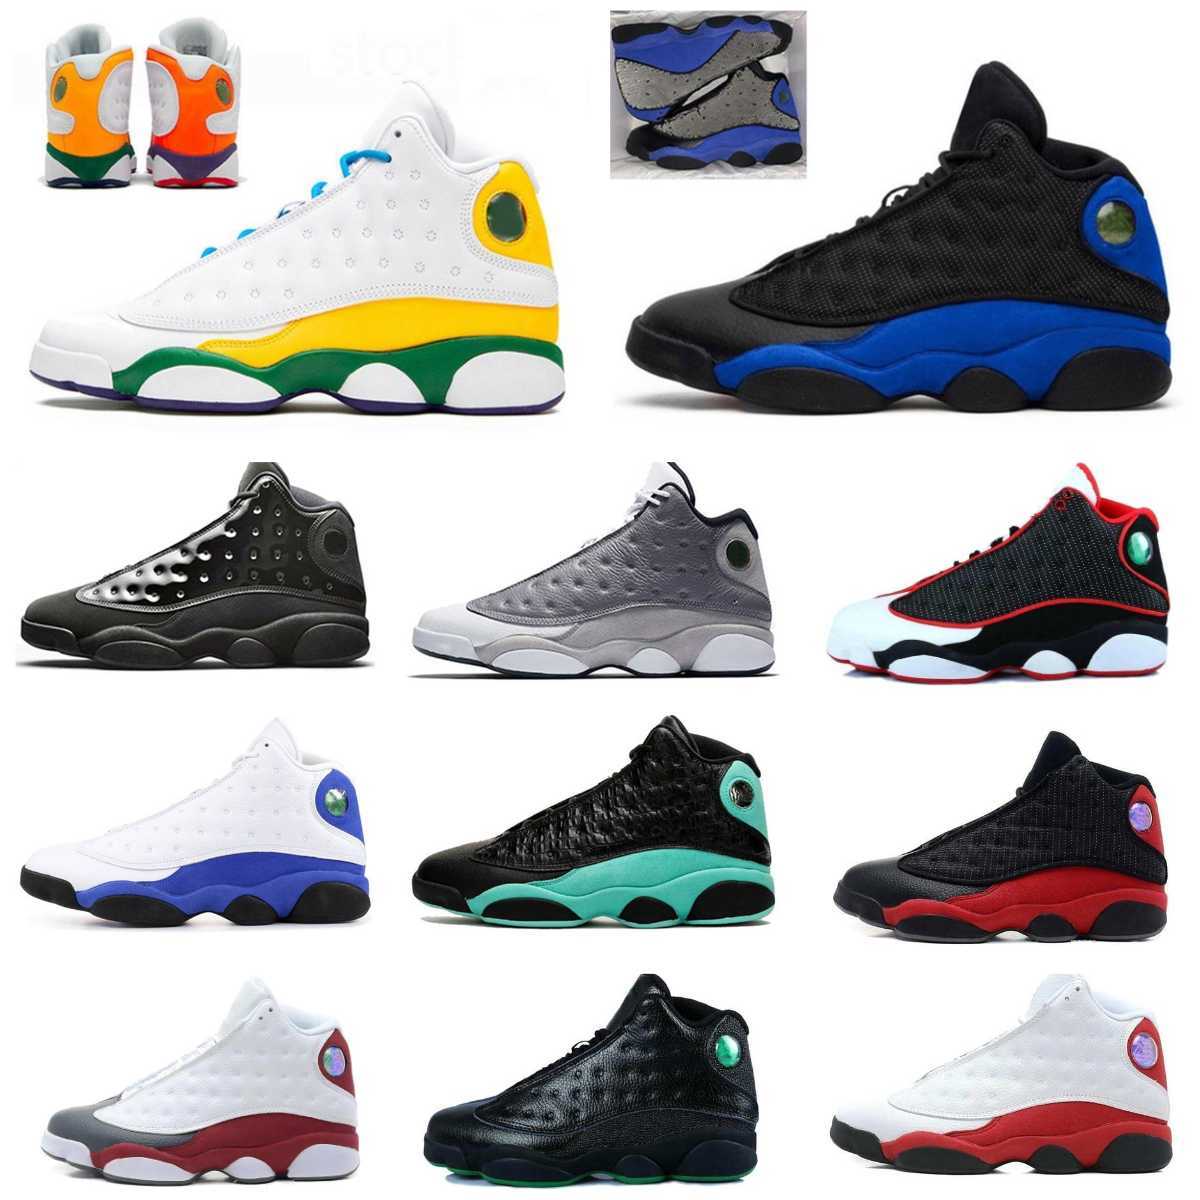 

2023 With Box Jumpman 13 Basketball Shoes Black Flint 13s Del Sol Playground Navy University Blue Cat Court Purple Starfish Retros Women Mens Trainers Sneakers, Ask the seller about some sizes